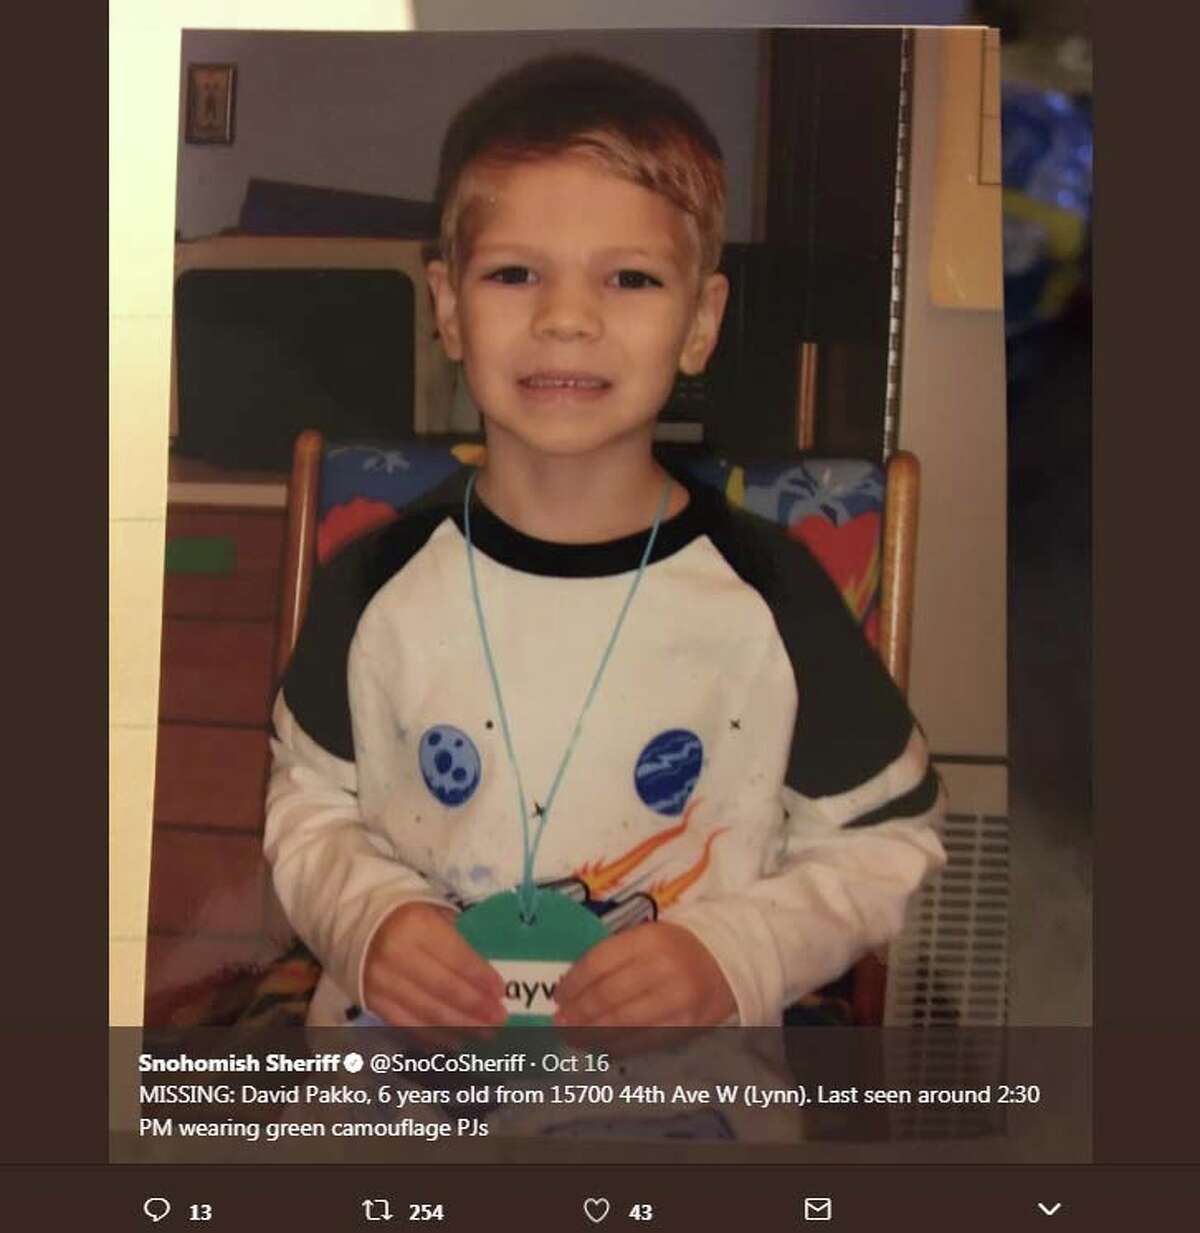 The Snohomish County Sheriff‏'s Office posted several messages with information about the missing boy, 6-year-old Dayvid Pakko, on Oct. 16, 2017. Pakko's body was found the next day in a dumpster near the apartment from where he disappeared.